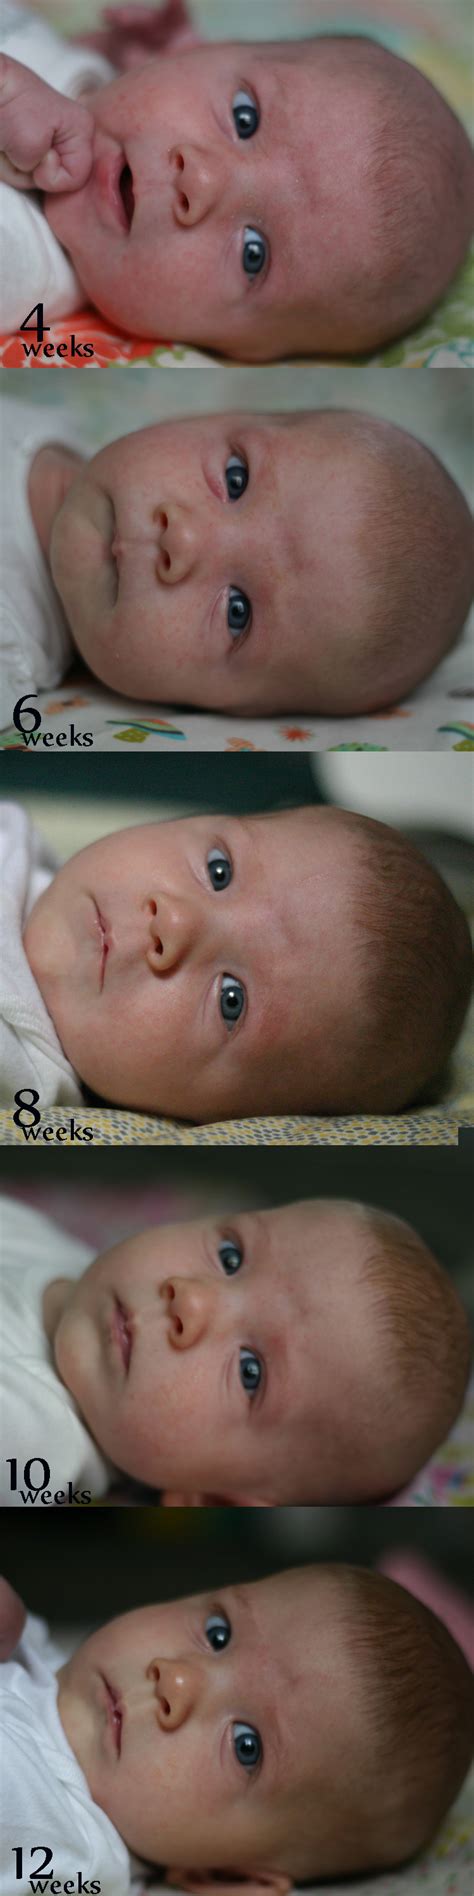 Creating A Every Changing Face View As Your Baby Grows Two Weeks Seems